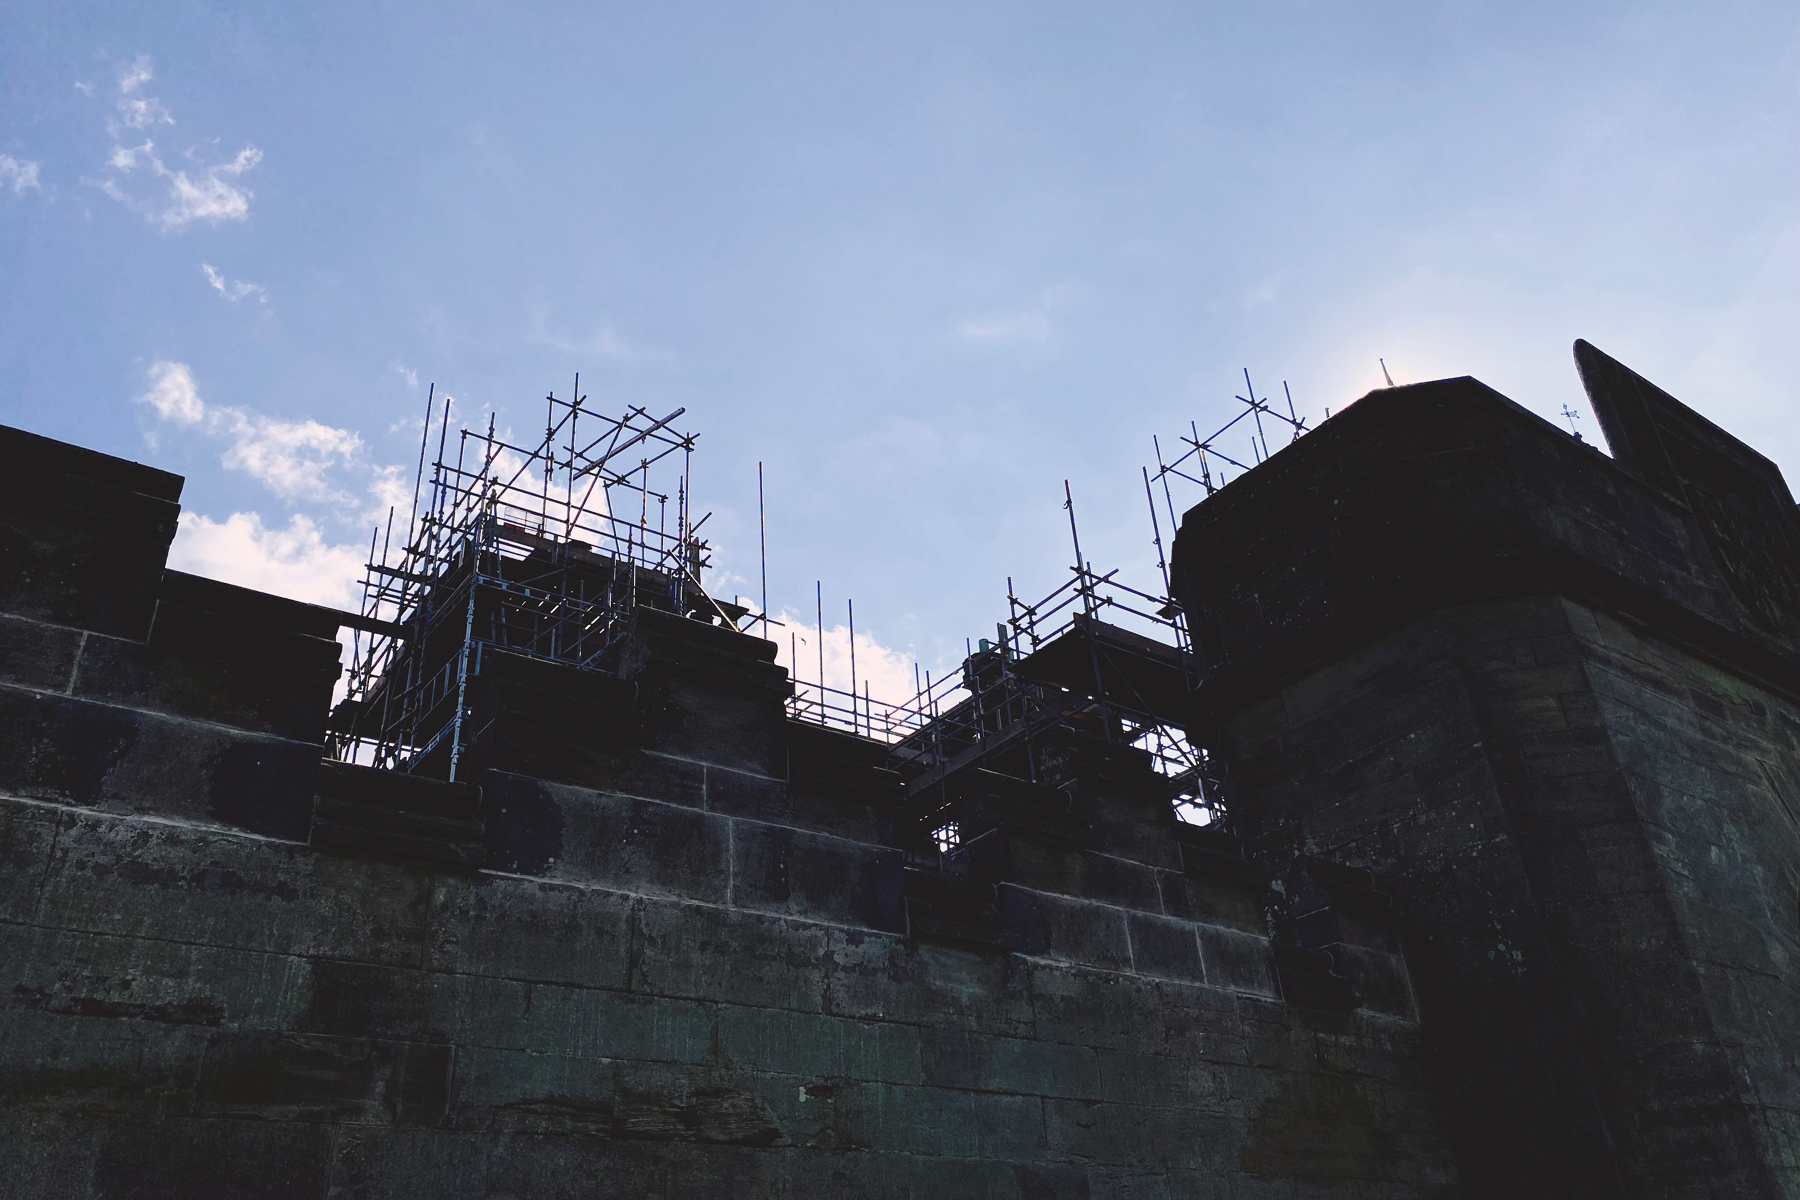 Stone walls and scaffolding silhouetted against a blue sky